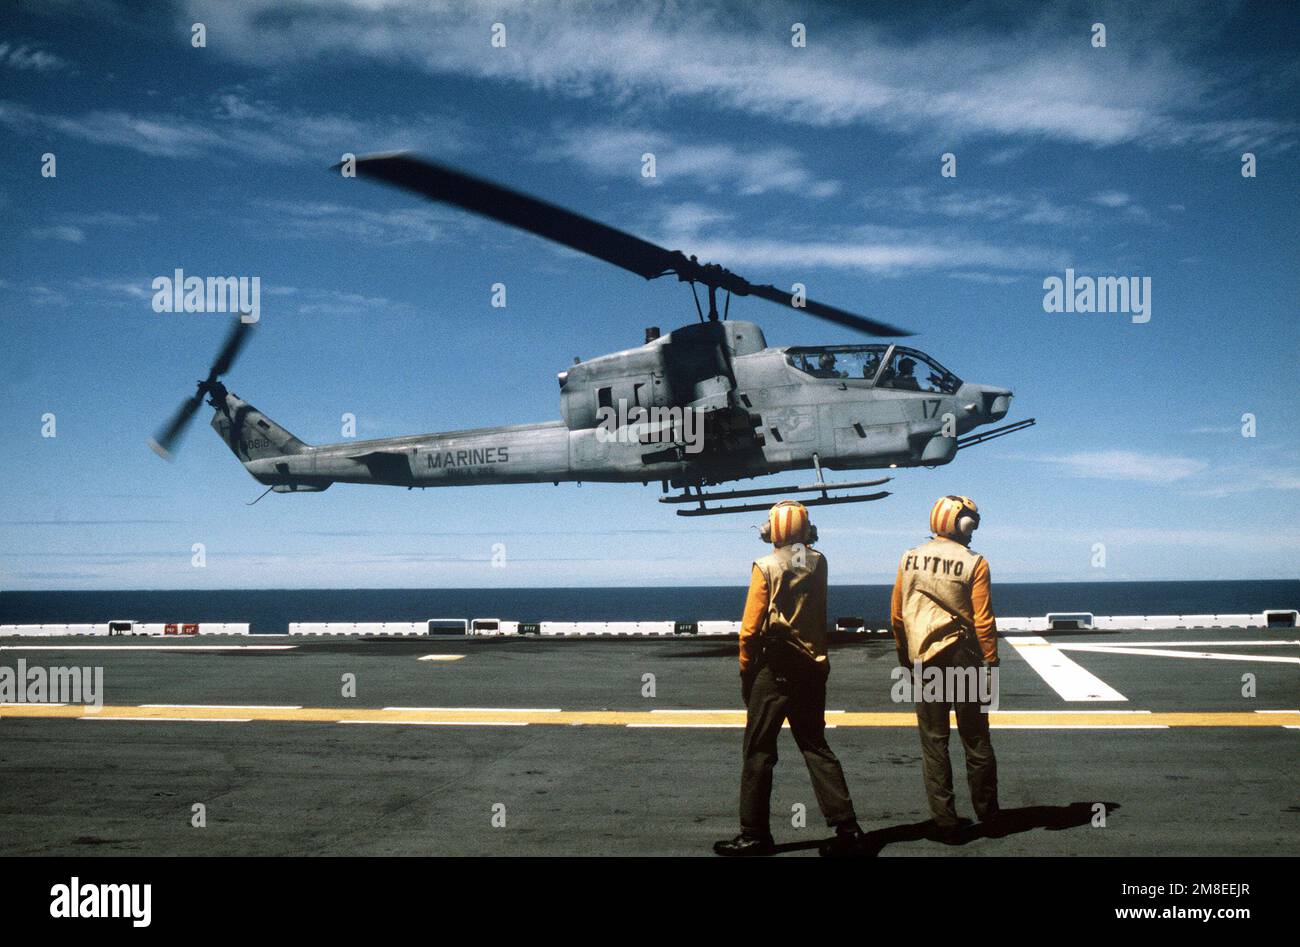 A Marine Utility/Attack Helicopter Squadron 269 (HML/A-269) AH-1W Sea Cobra helicopter comes in to land on the flight deck of the amphibious assault ship USS NASSAU (LHA 4) during Operation DESERT SHIELD. Subject Operation/Series: DESERT SHIELD Country: Northern Arabian Sea Stock Photo